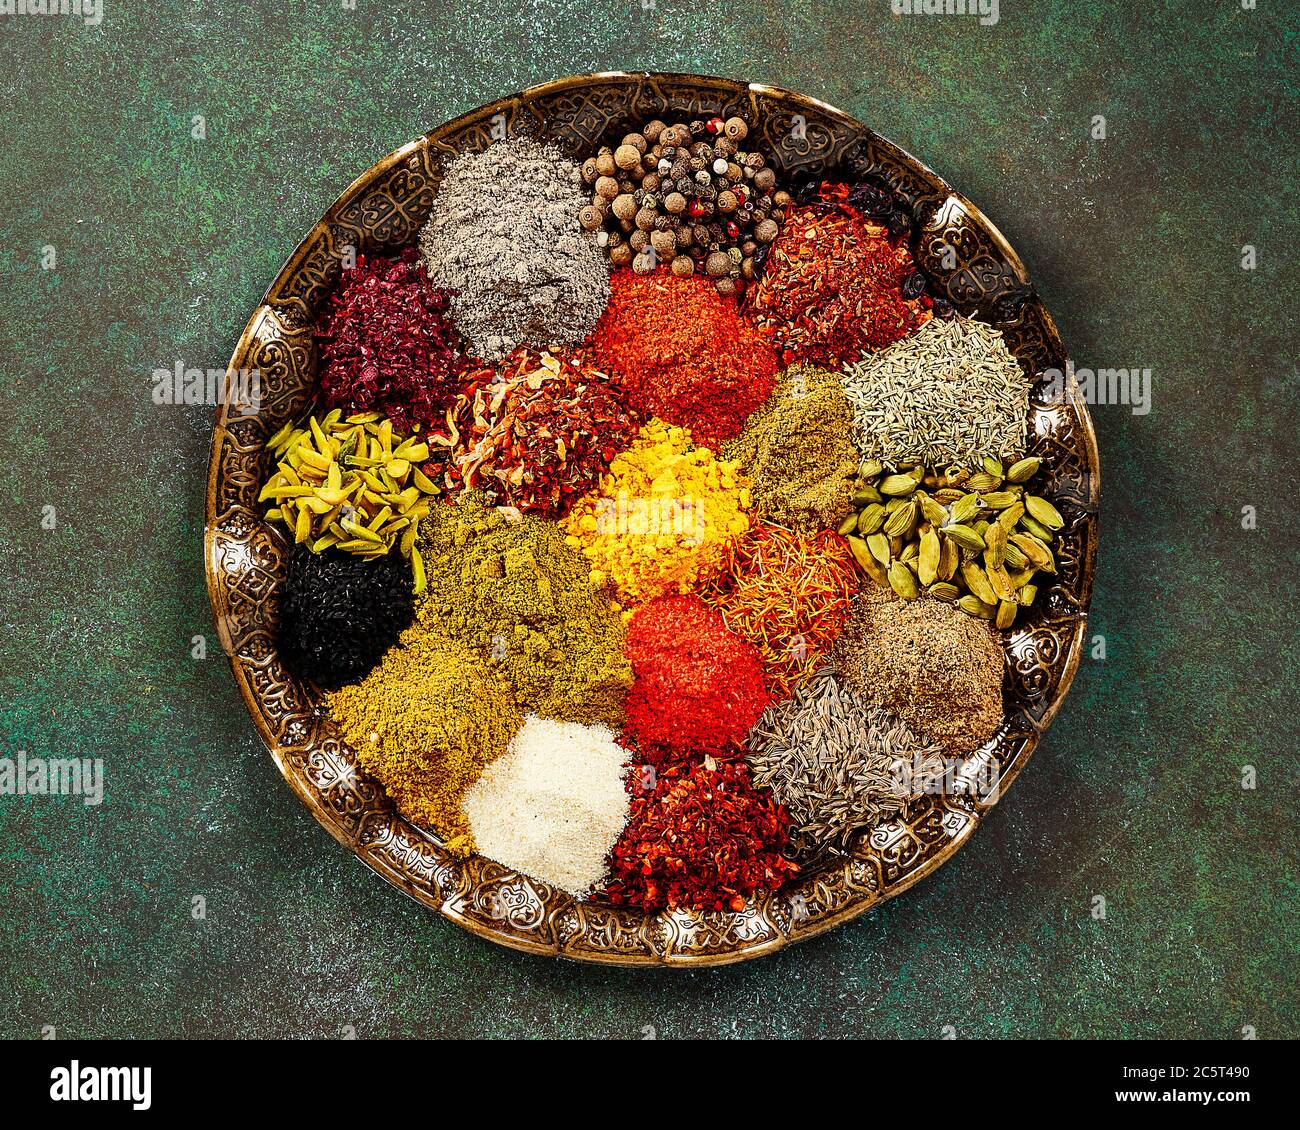 Various spice and dried herbs on oriental plate. Top view of spices Stock Photo